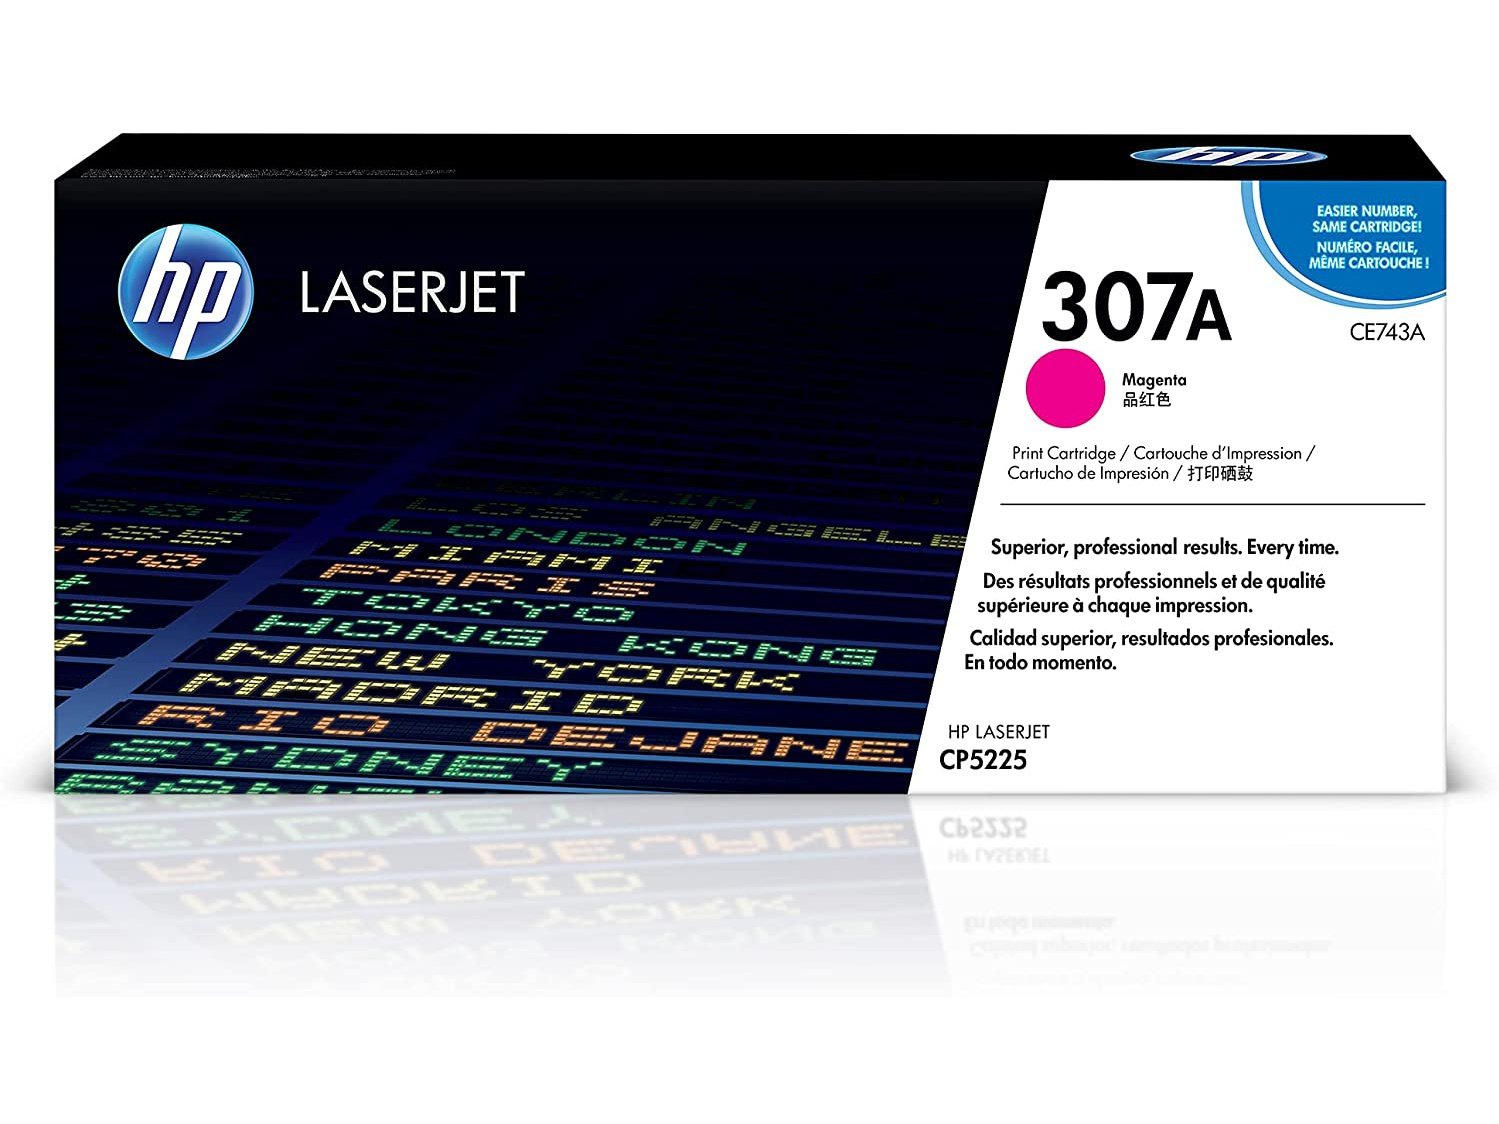 ICU Compatible/ OEM Get HP ICUCE743A Yields 7000 Pages 307A CE743A Magenta Laser Toner Cartridge